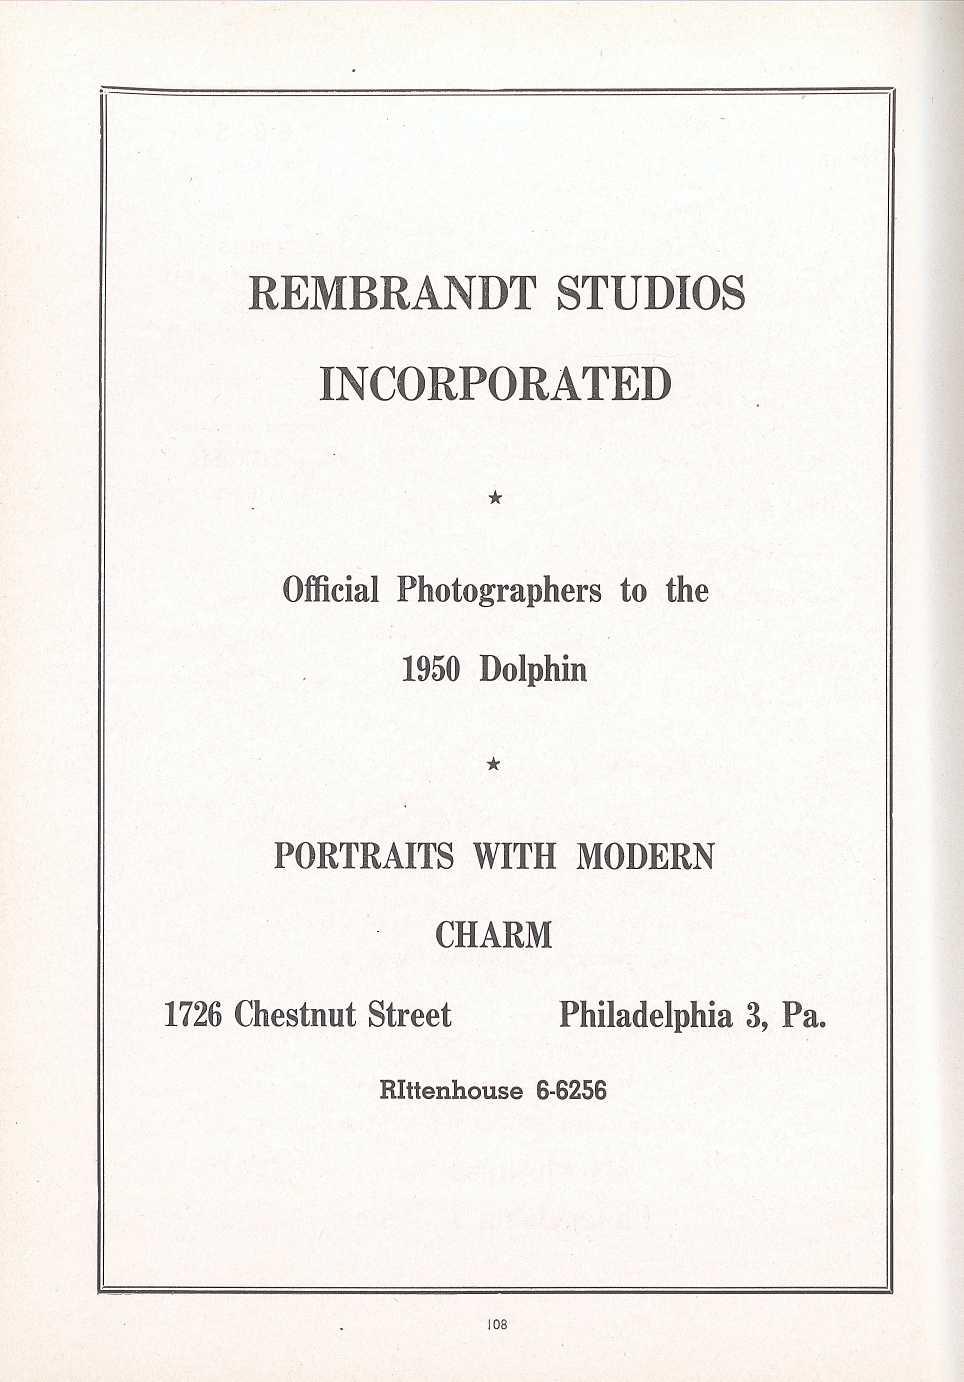 REMBRANDT STUDIOS INCORPORATED Official Photographers to th e 1950 Dolphin